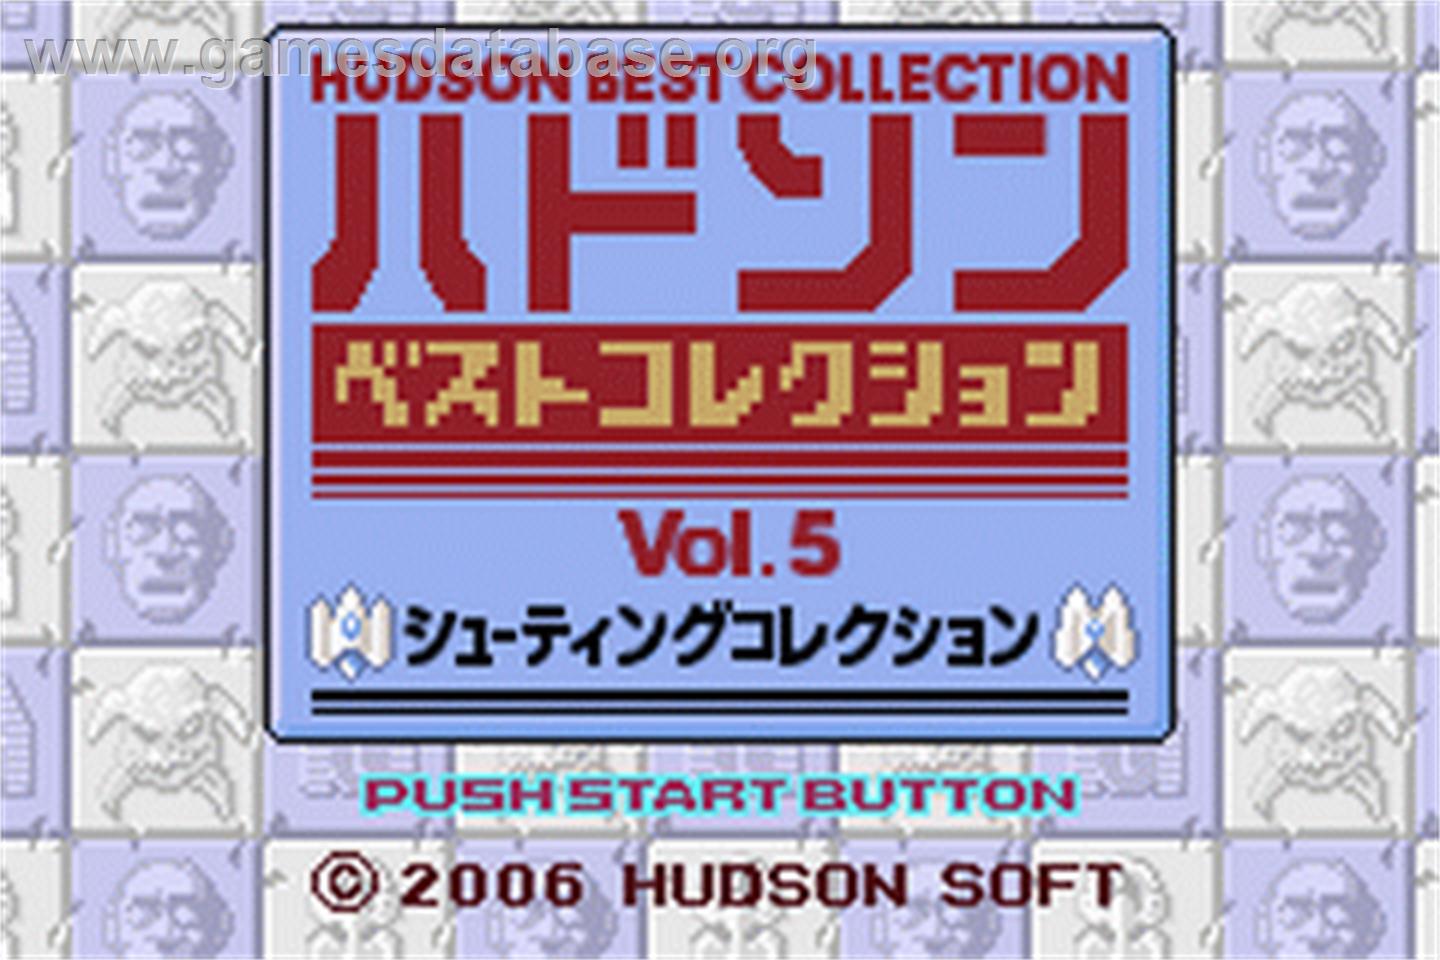 Hudson Best Collection Vol. 5: Shooting Collection - Nintendo Game Boy Advance - Artwork - Title Screen